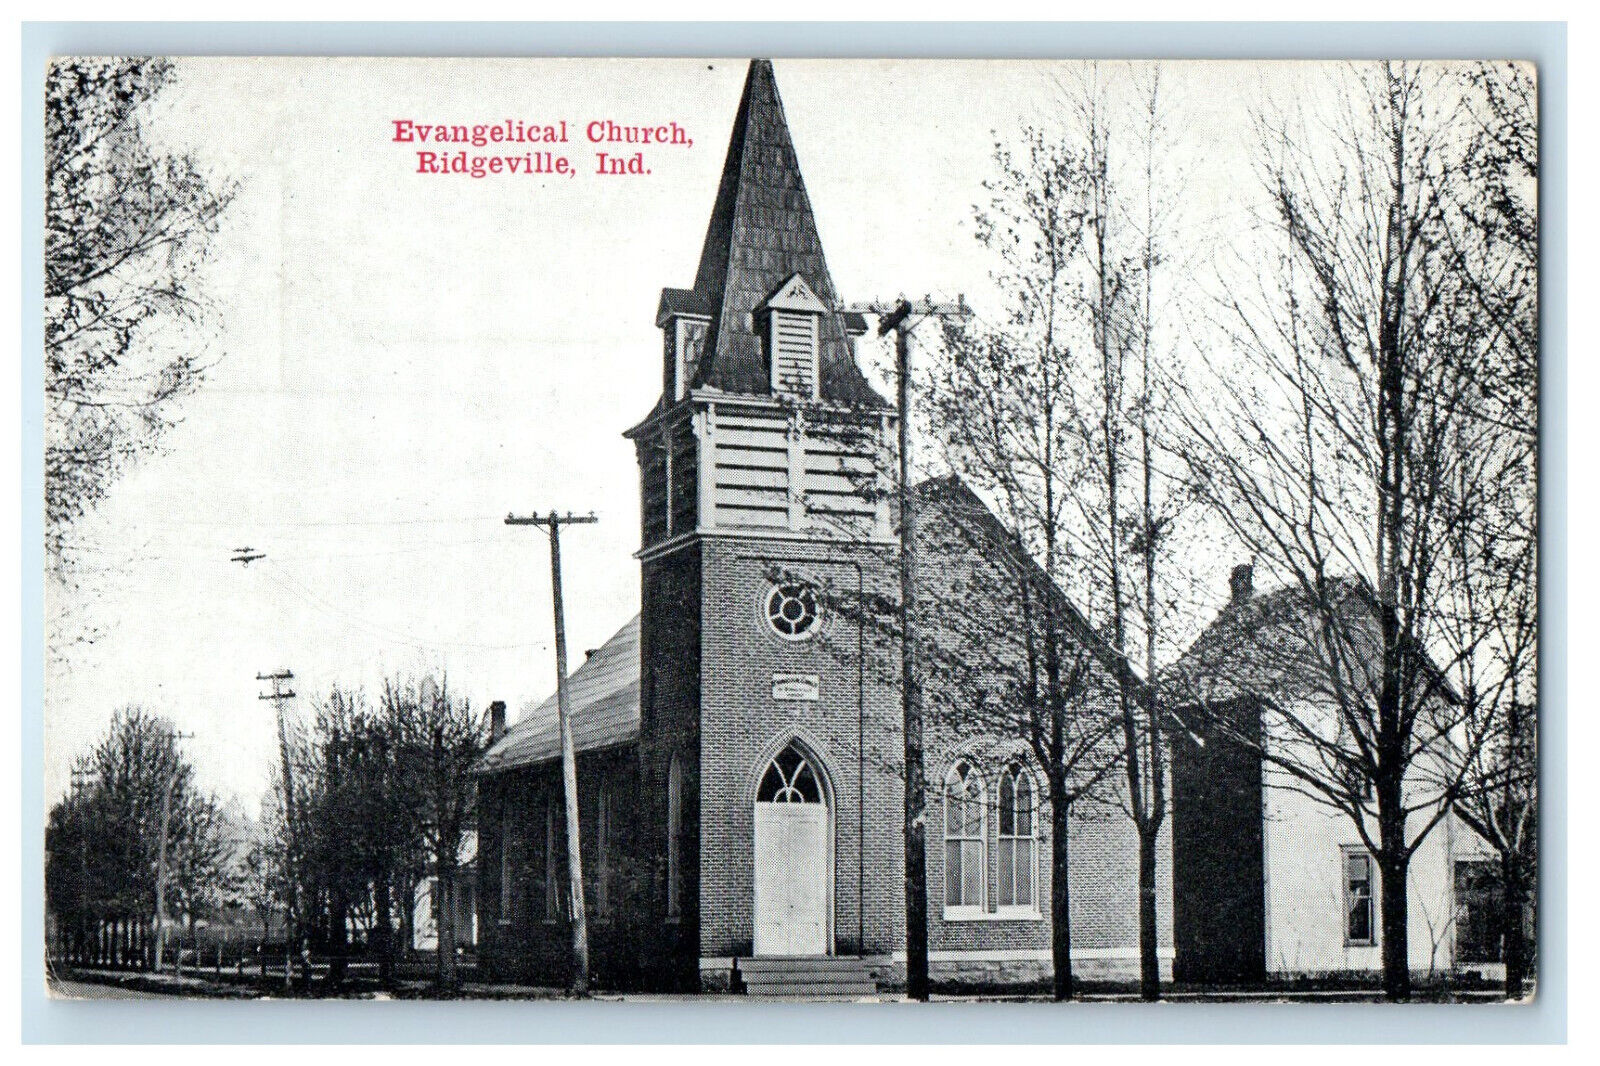 1917 Evangelical Church, Ridgeville, Indianapolis IN Posted Postcard